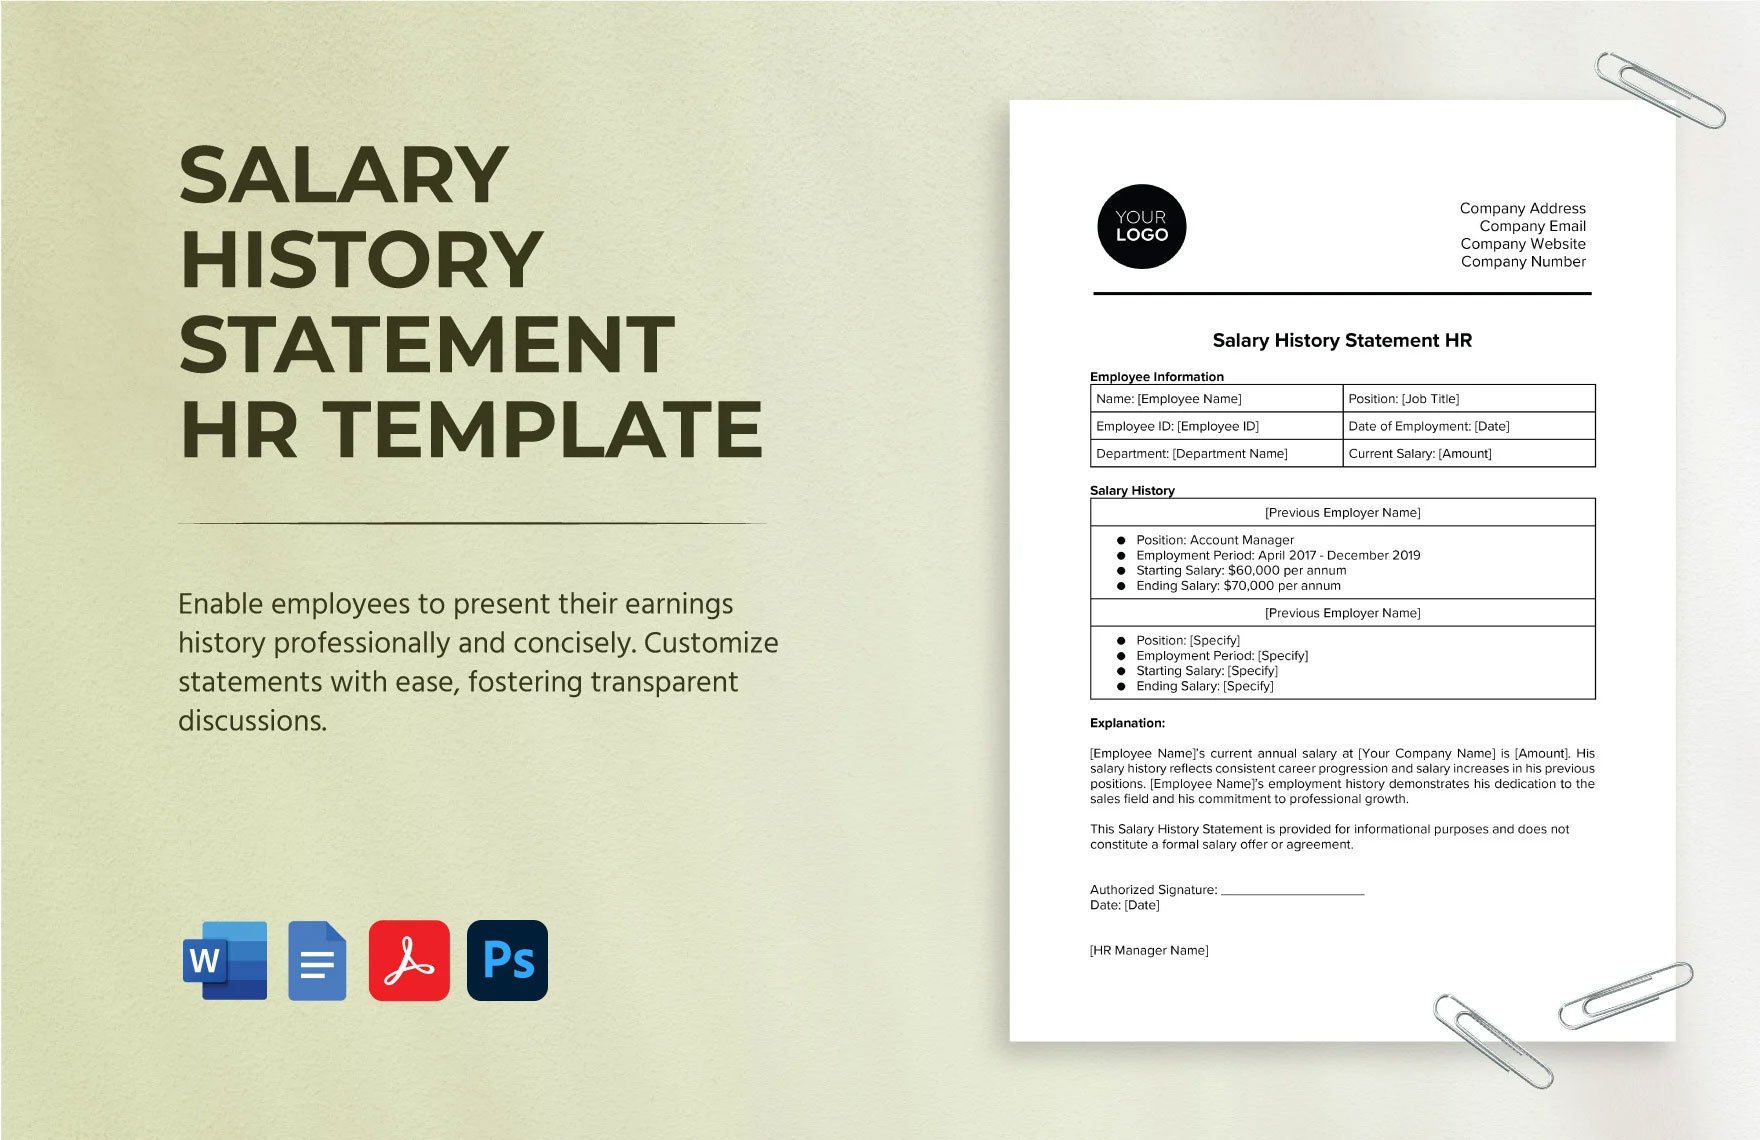 Salary History Statement HR Template